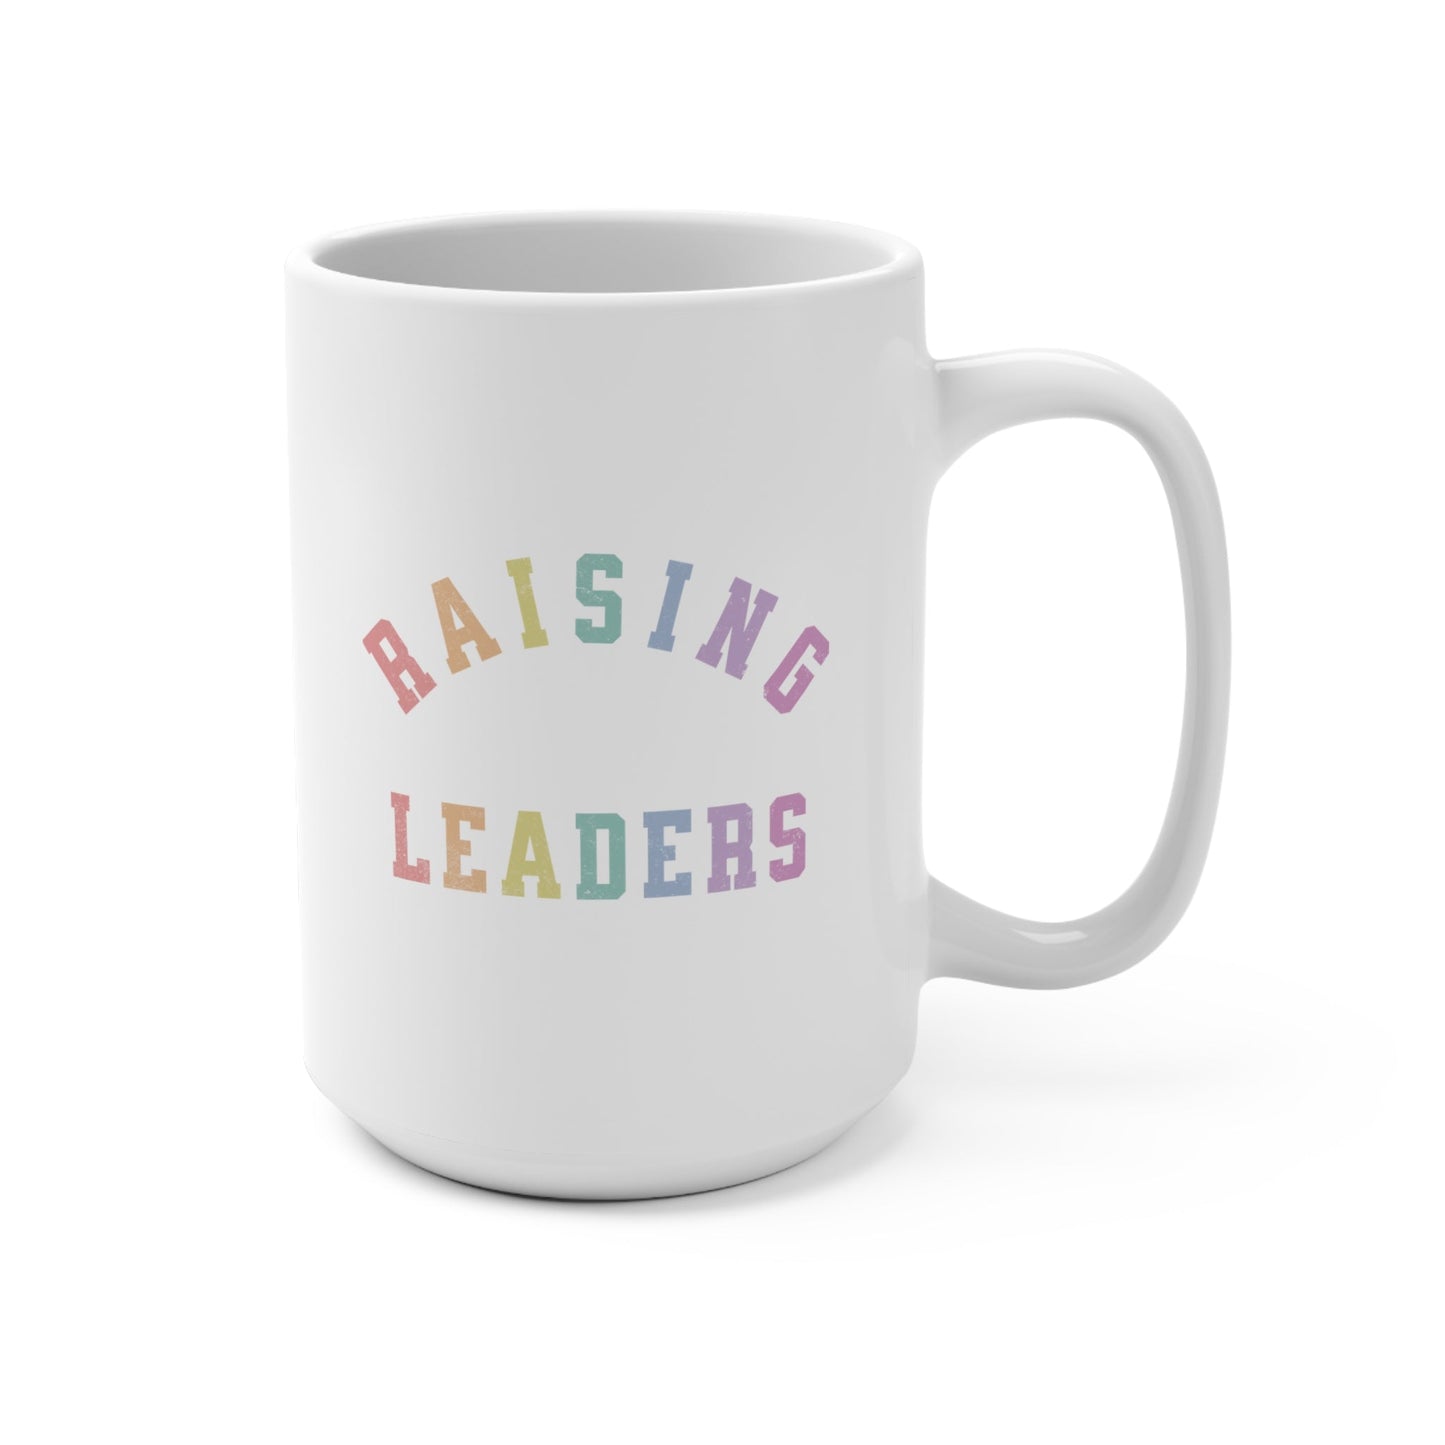 is designed for moms who are raising kids to be leaders in their communities and beyond.